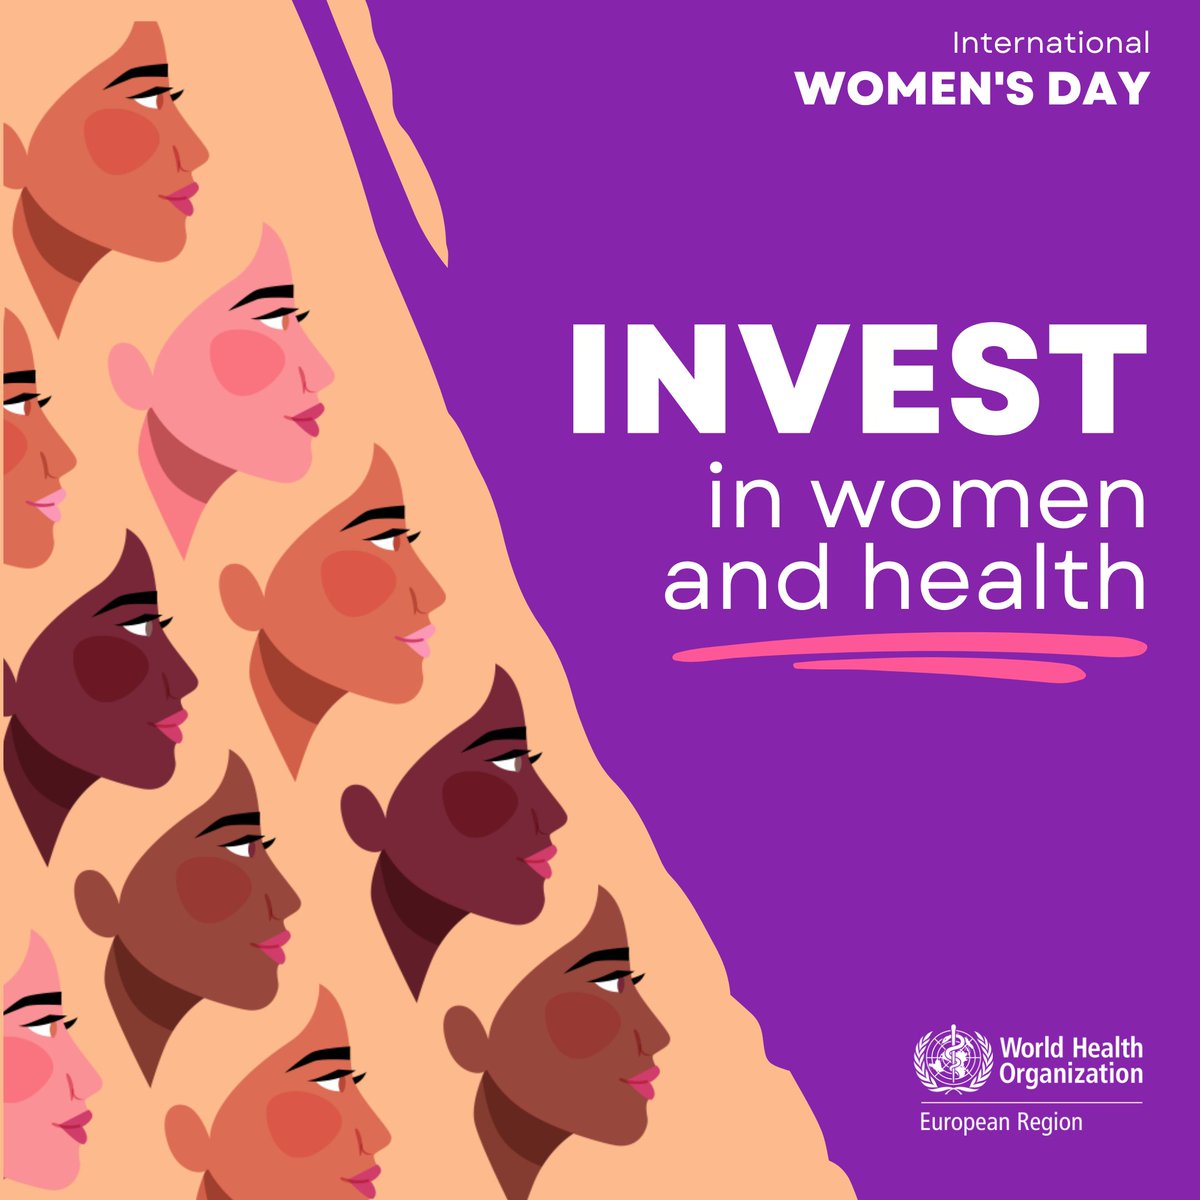 Today is International Women's Day! 👩‍🏫👩‍🎓🧕👩‍🔬👩‍👩‍👧👩‍🦼👵🏿 Equality is non-negotiable. The right to health is non-negotiable. ❤️#InvestInWomen’s health❗️ ❤️#InvestInWomen’s health❗️ ❤️#InvestInWomen’s health❗️ #IWD2024